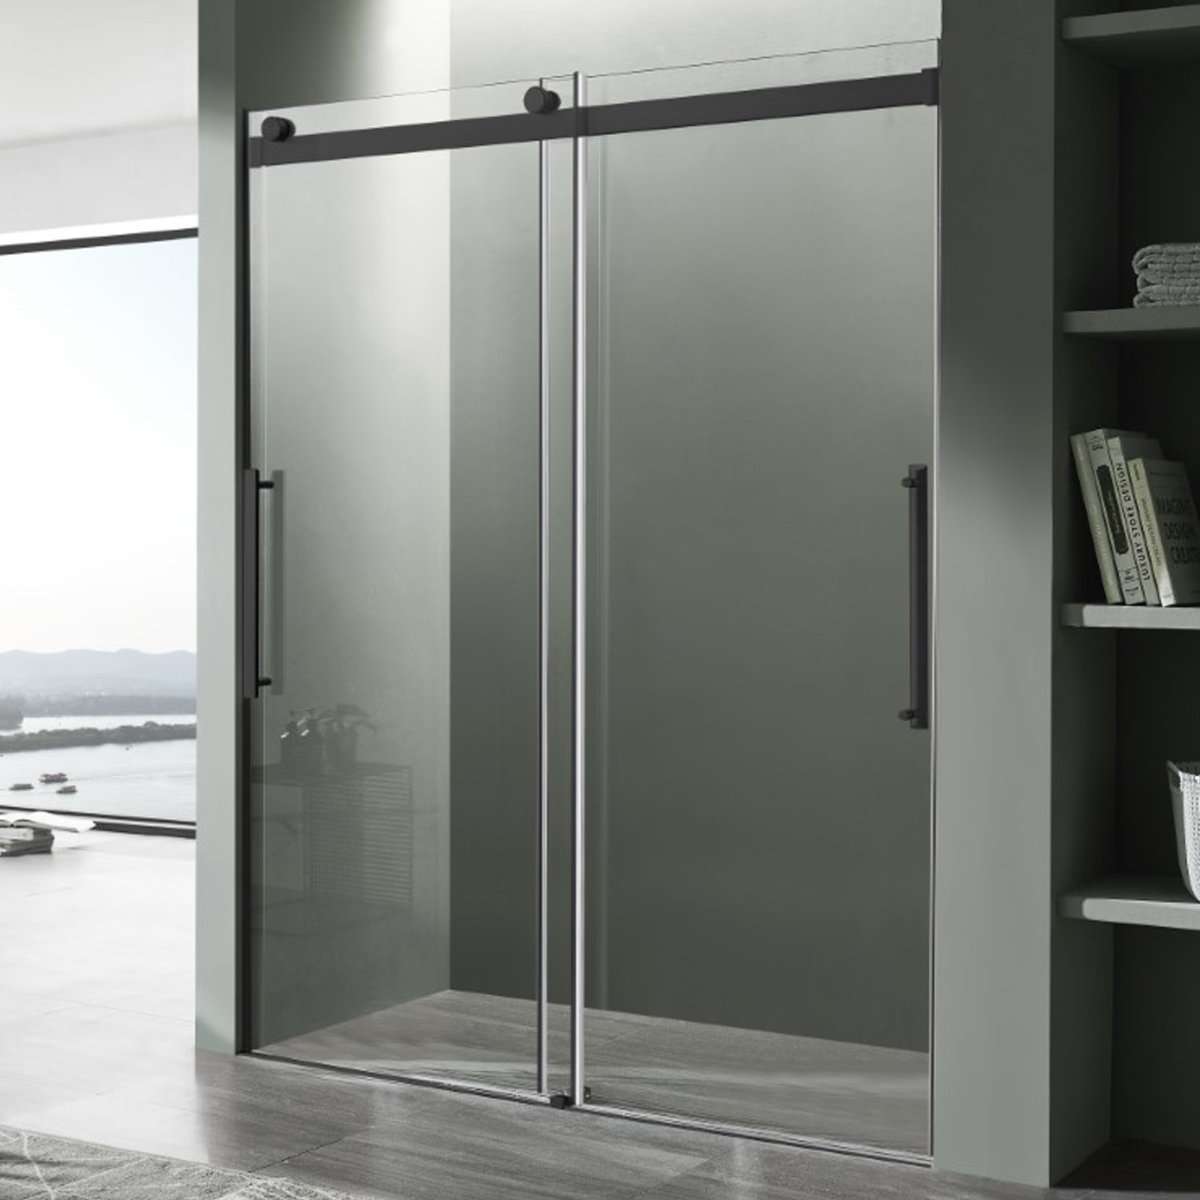 Picture of Anzzi SD-FRLS05901MB 48 x 76 in. Stellar Series Frameless Sliding Shower Door with Handle, Matte Black